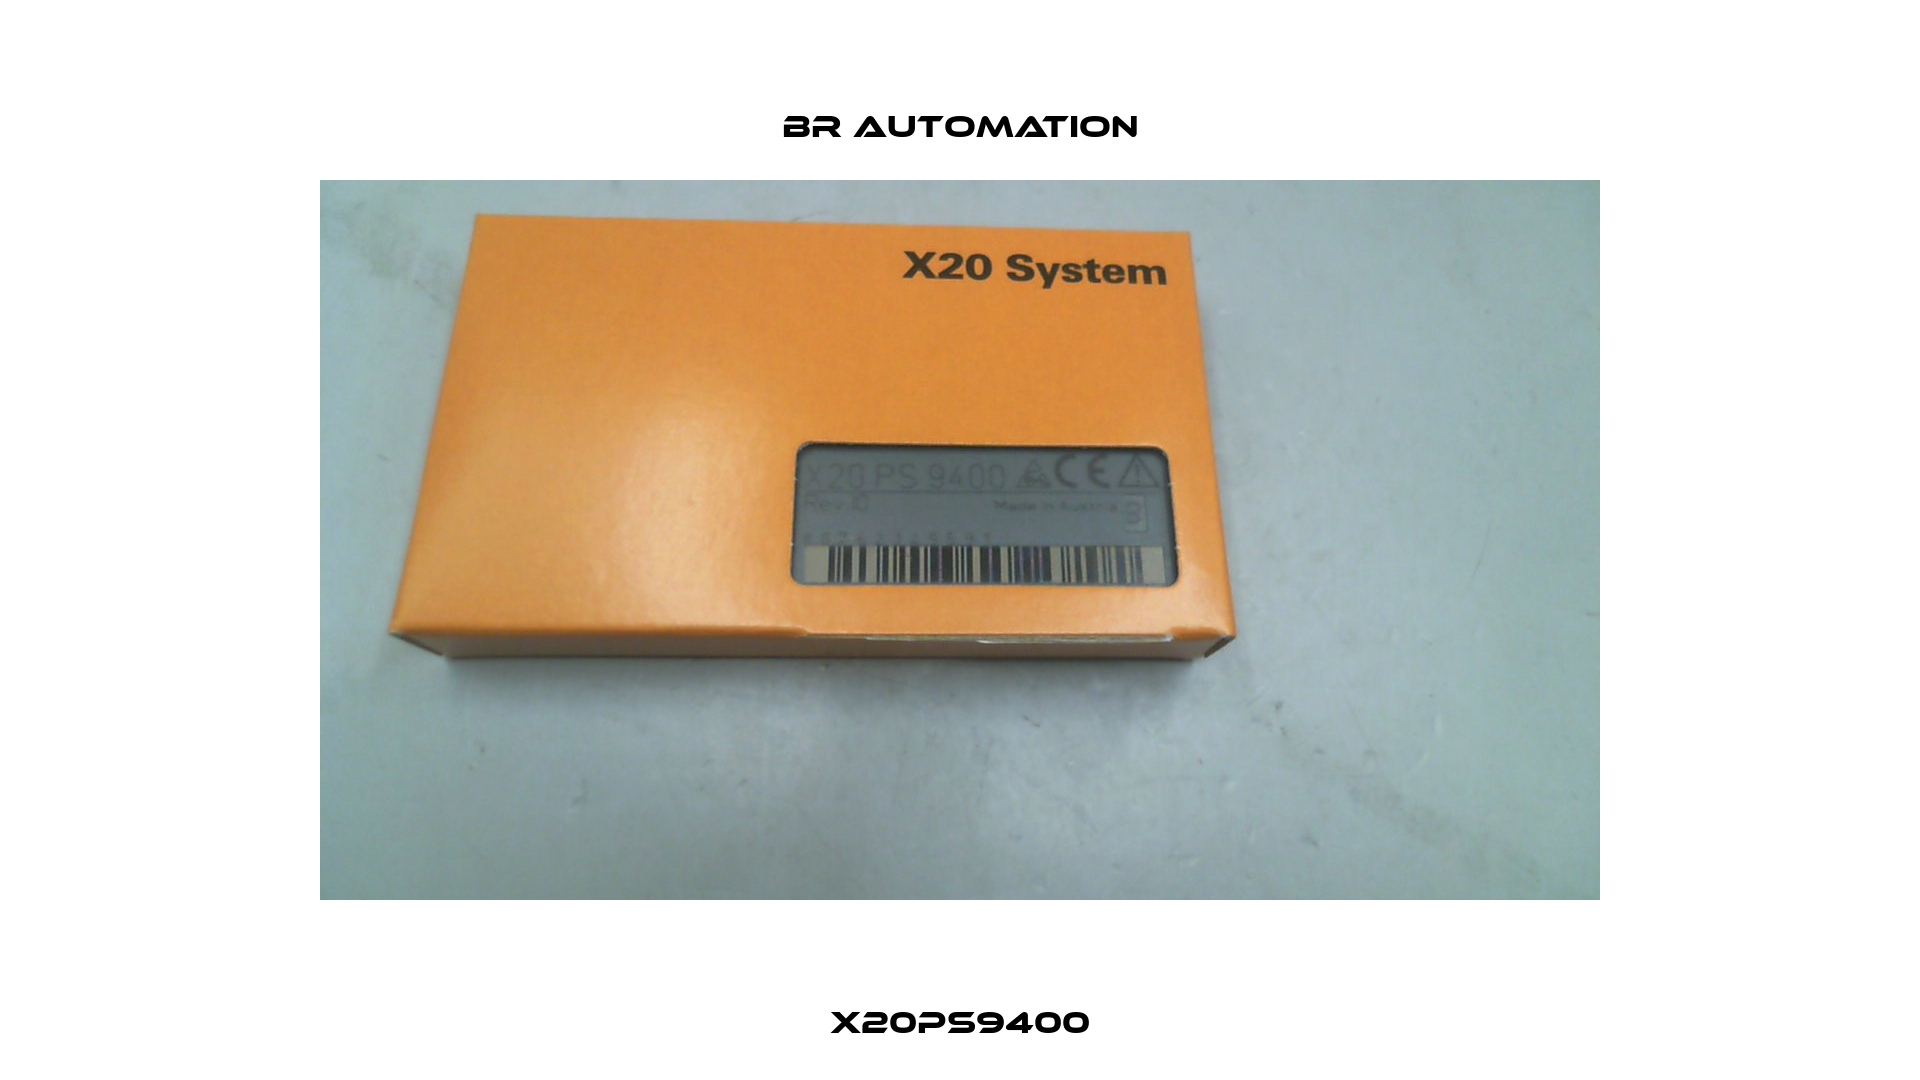 X20PS9400 Br Automation